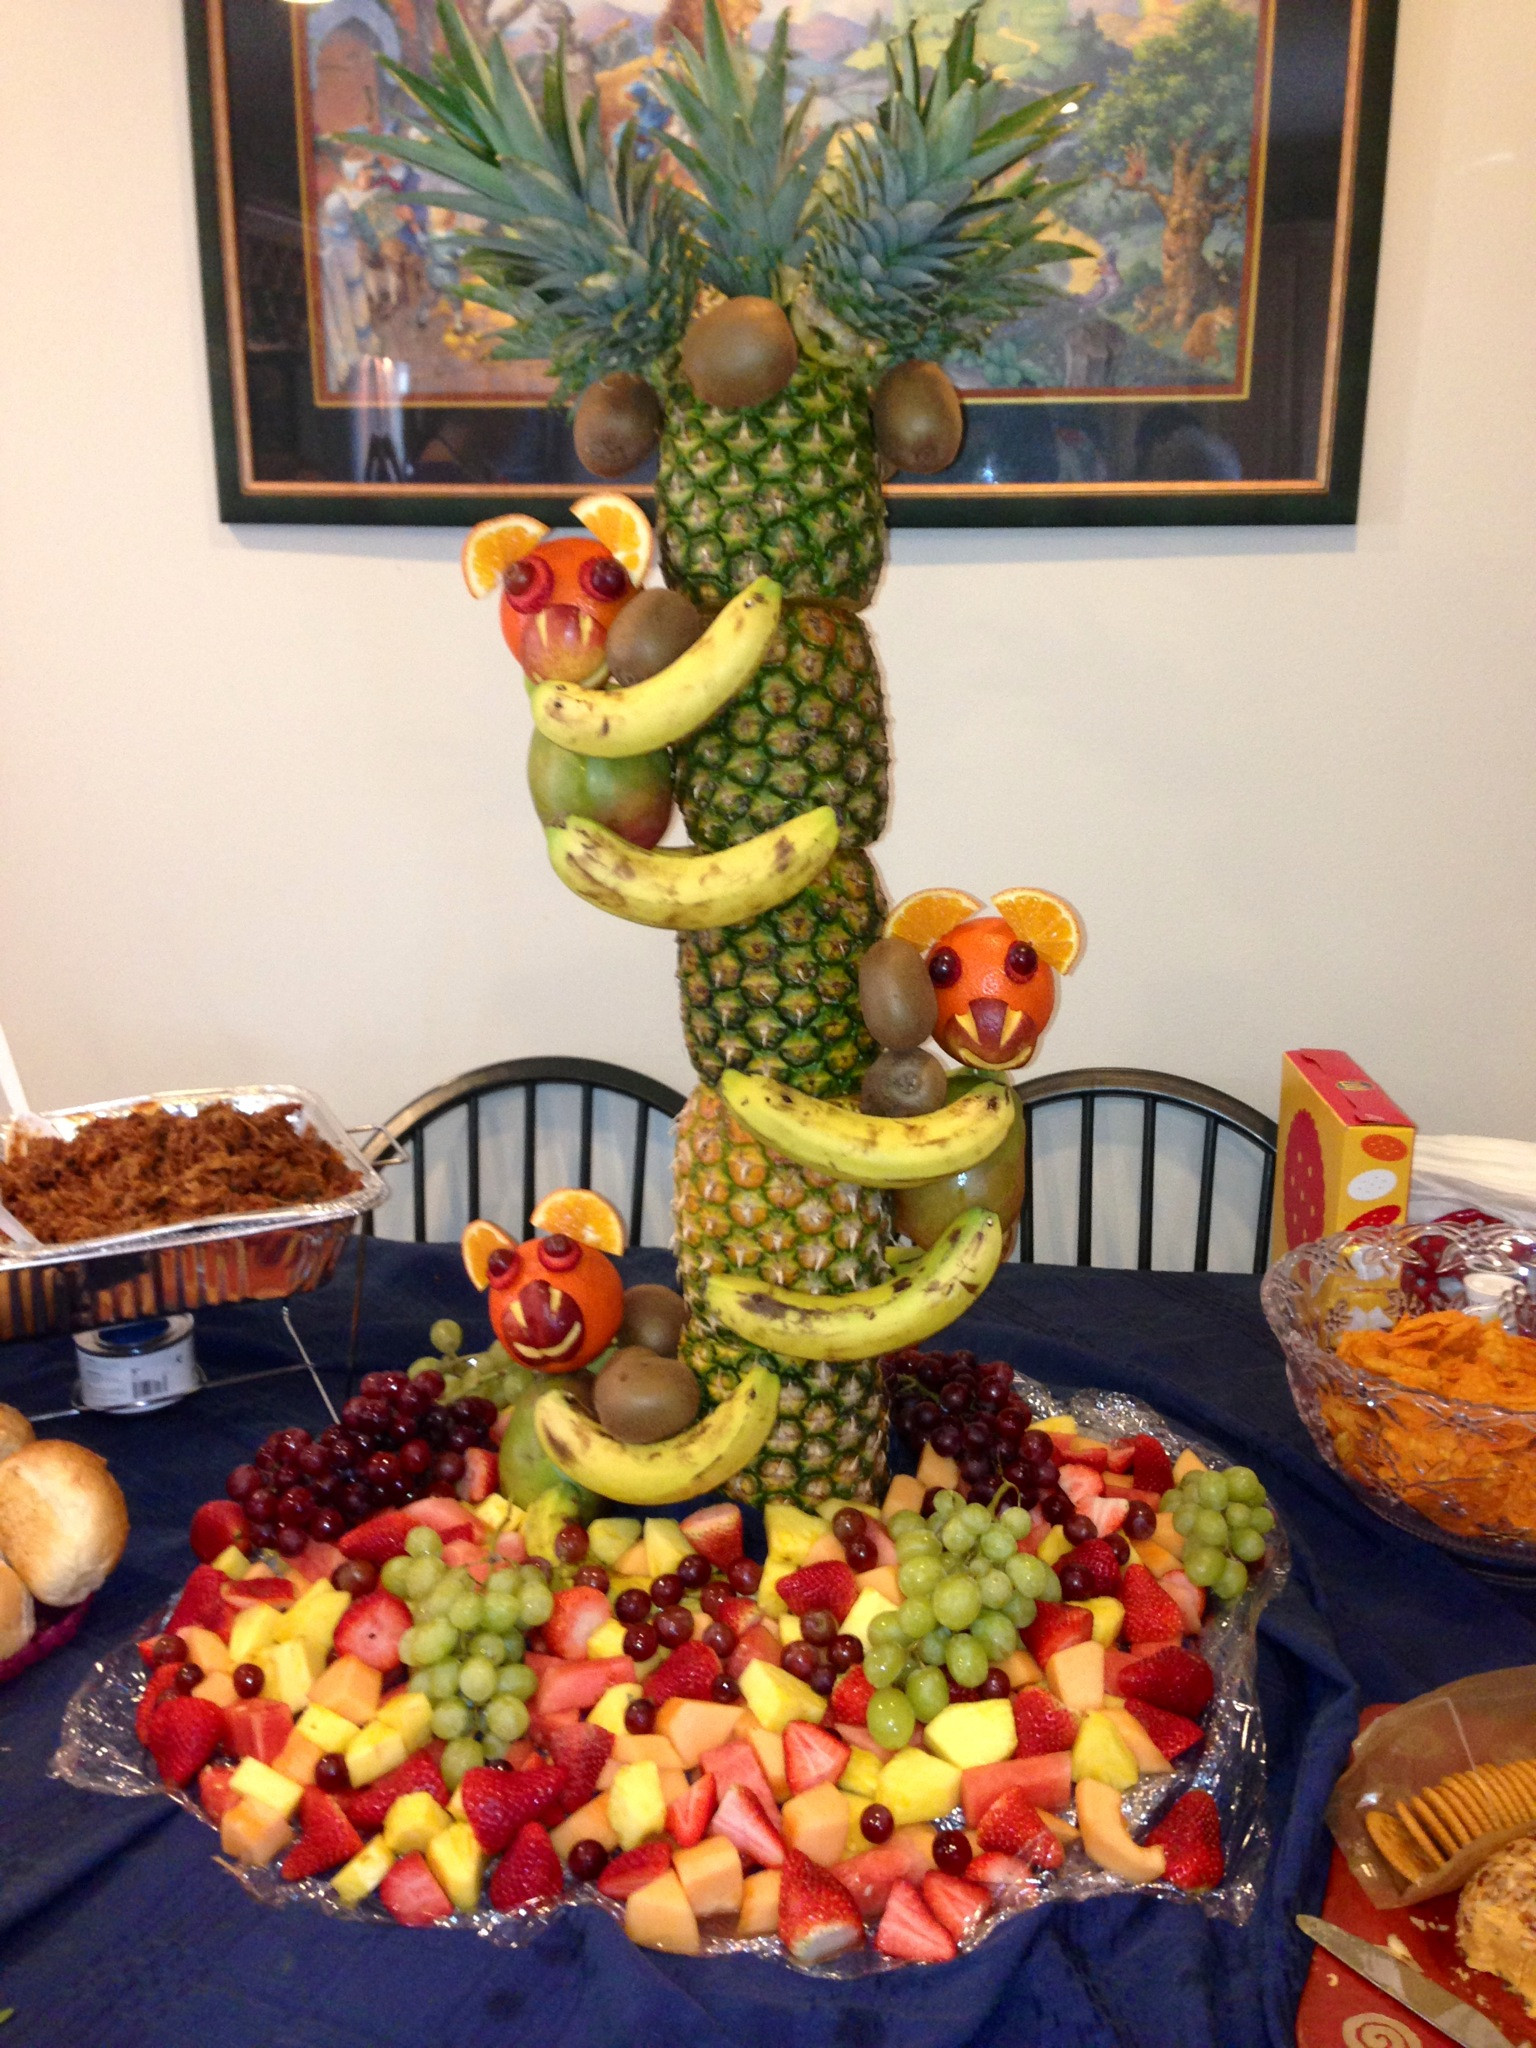 Baby Shower Food Decorations
 Some Ideas For Jungle Theme Baby Shower Food